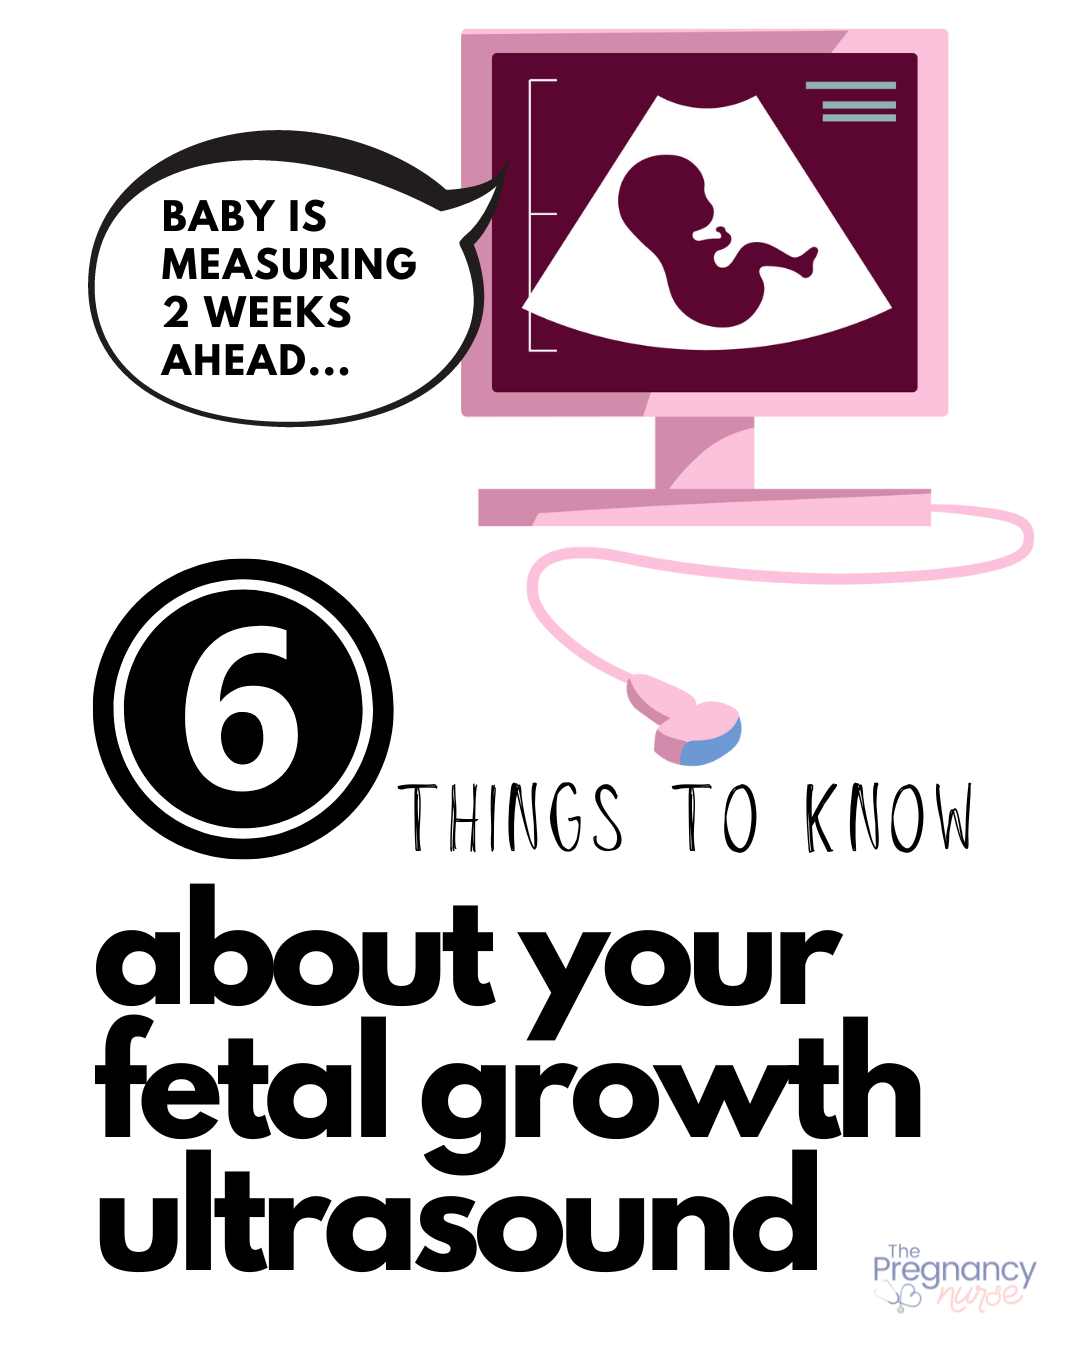 fetal ultrasound saying "baby is measuring 2 weeks head" // 6 things to know about your fetal growth ultrasound